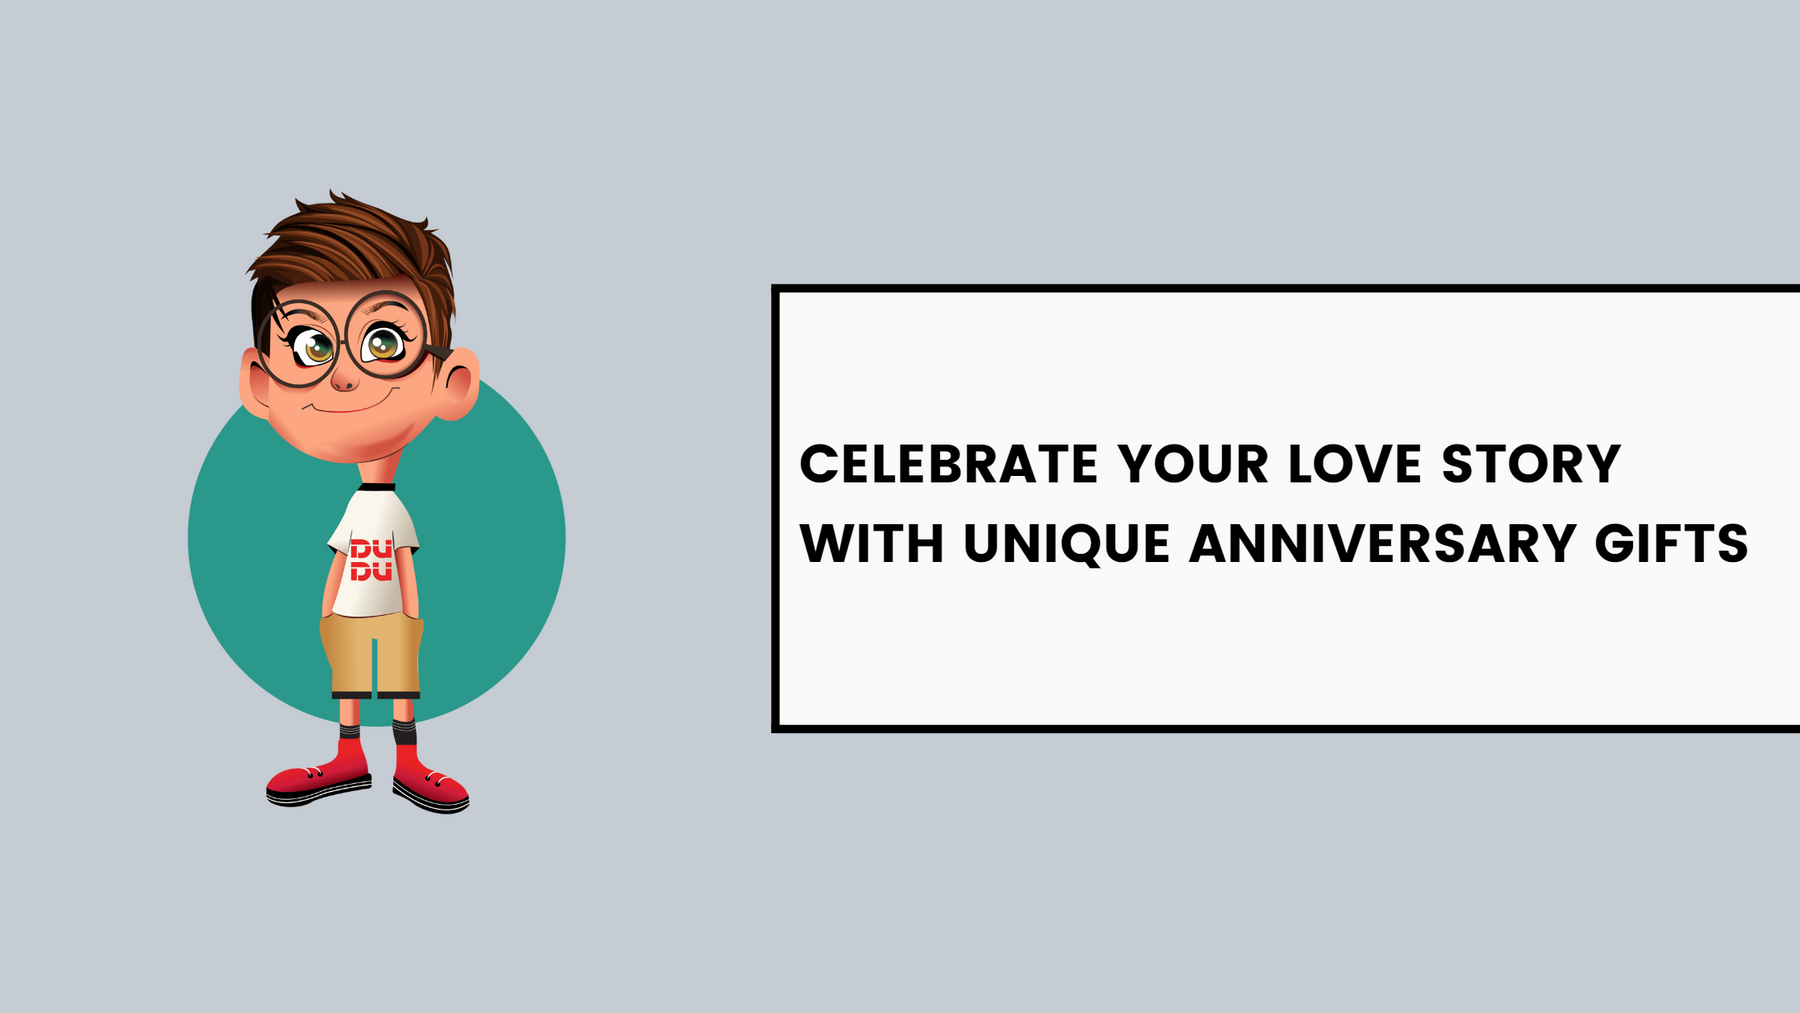 Celebrate Your Love Story with Unique Anniversary Gifts